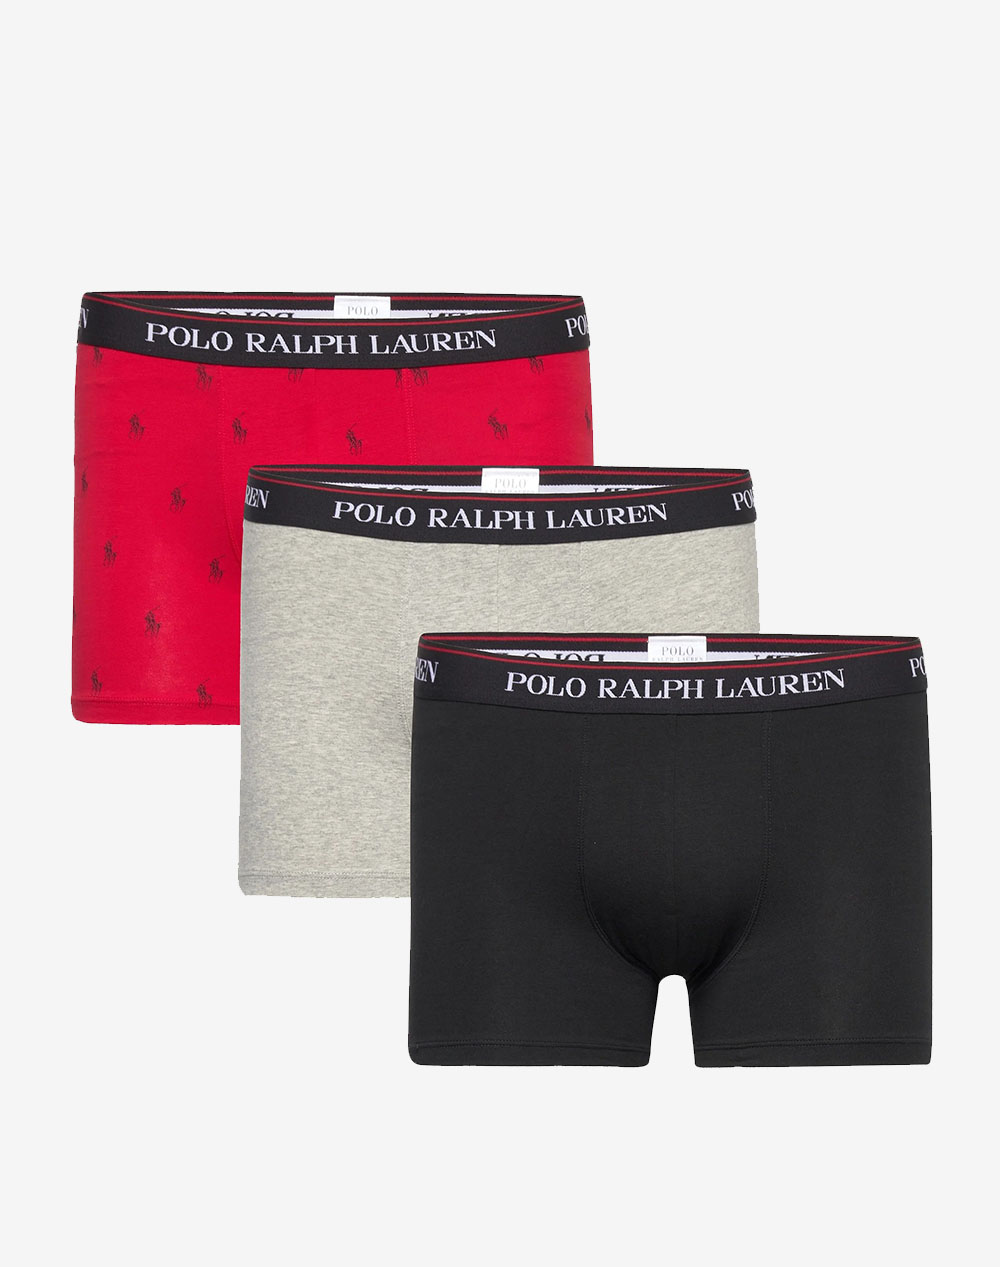 POLO RALPH LAUREN ΜΠΟΞΕΡ BCI CLSSIC TRUNK-3 PACK-TRUNK 714830299-102 Red 0420APOLO1320009_XR25053